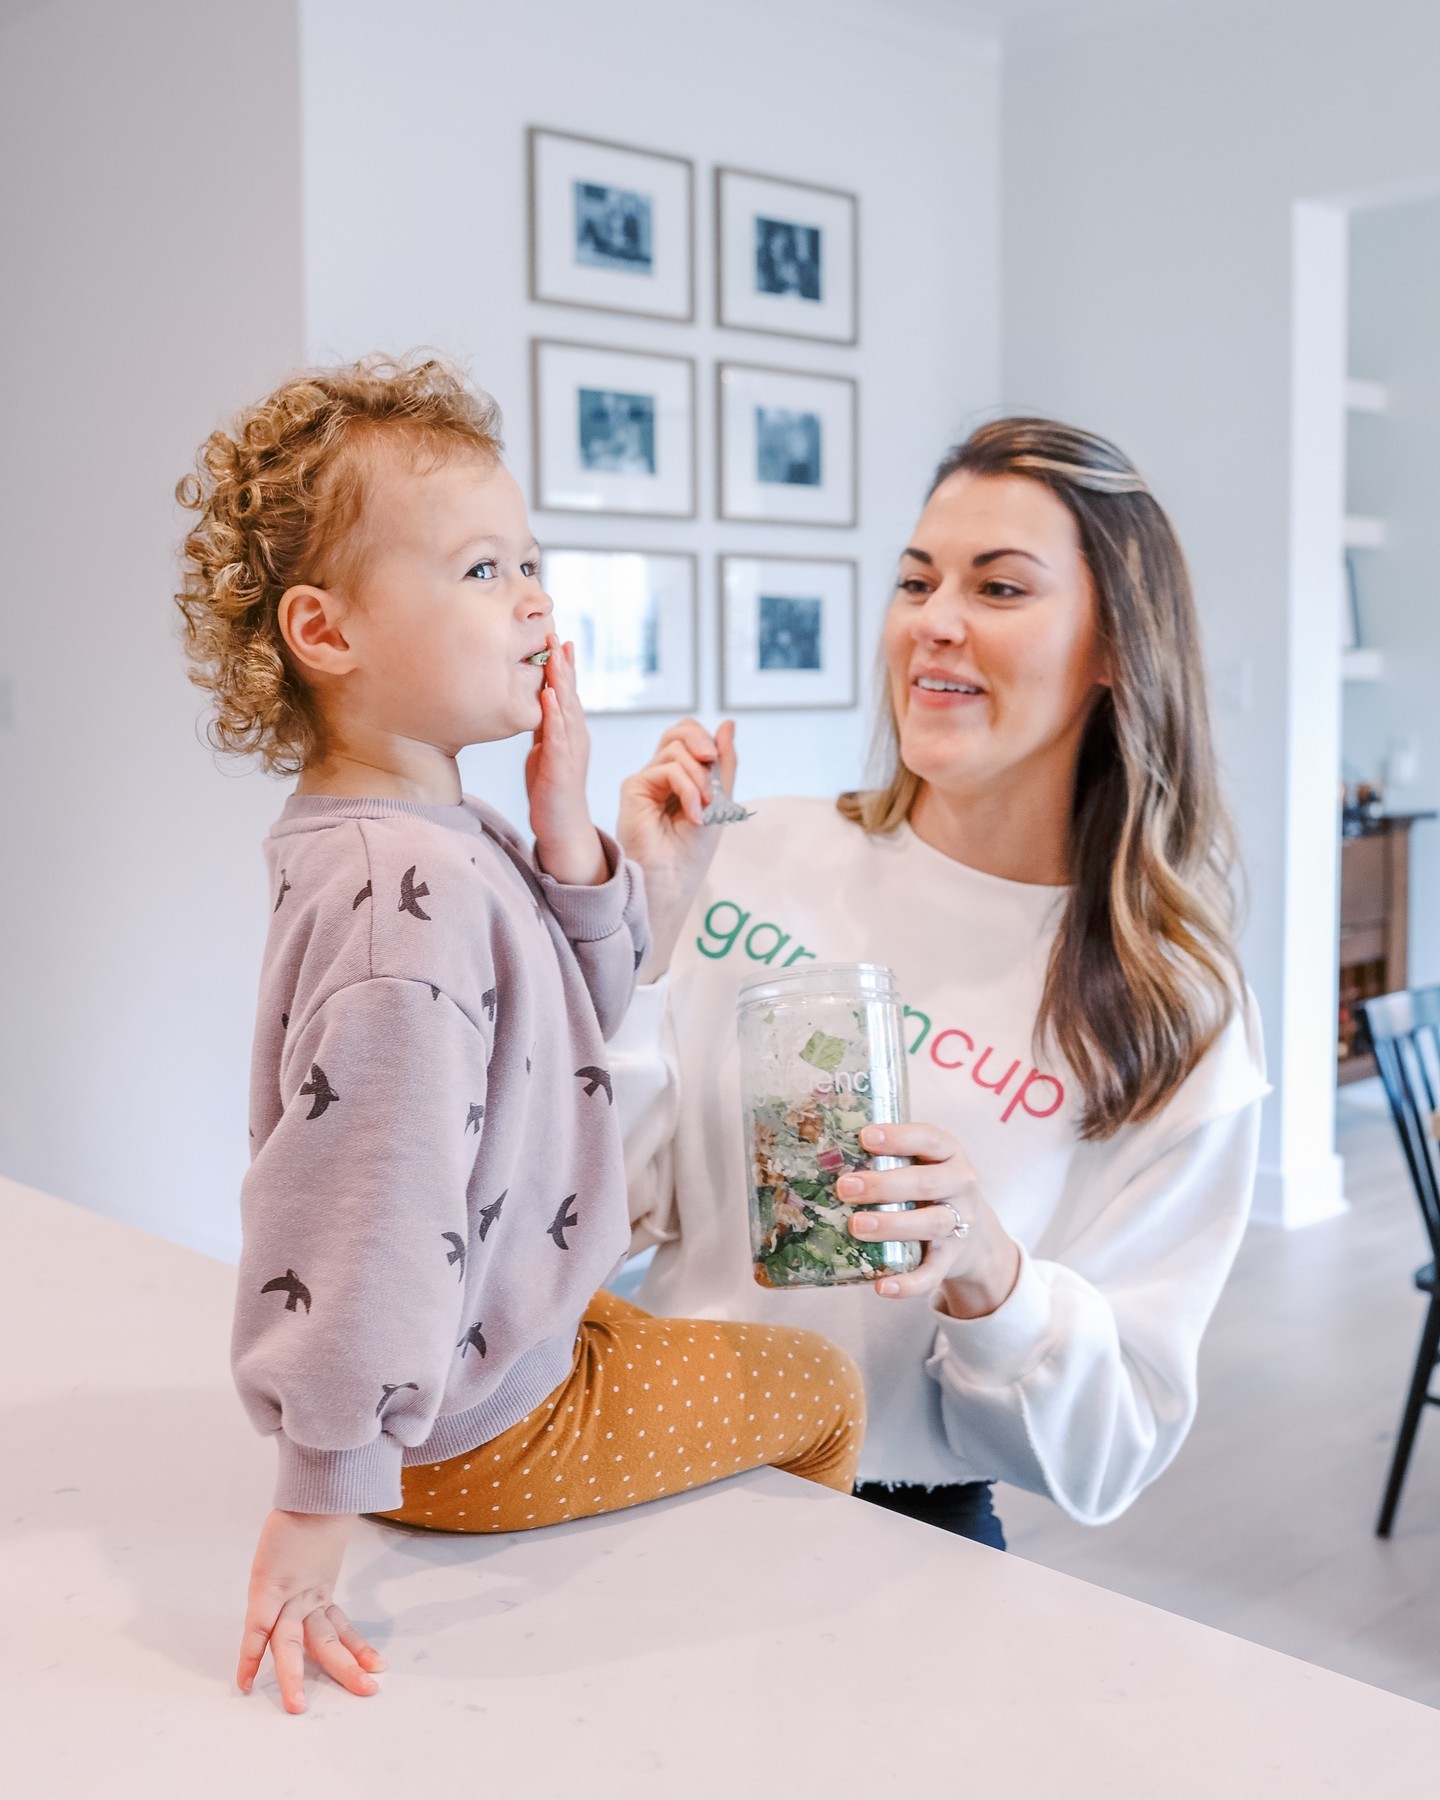 Let’s talk #momlife 

Busy, tired, sometimes messy, and ALWAYS hungry… @gardencuplife created turnkey salads that require no-prep and no clean-up because Gardencup gets you, mama! 

What else can Gardencup do to make your life a little easier? Give some ideas below! 

#gardencup #busymomlife #fitnessmomlife #busymomhacks #workingmomslife #fitnessmomma #busymommy #fitnessmommy #busymomma #busymoms #busymomlife #momswhoworkout #busymom #mealdeliveryservice #healthyfoodmadeeasy #eatmoregreens #cleaneater #nourishingfoods #smartchoices #healthyfoodchoice #cleanrecipe #easymealprep #madefresh #healthygoals #cleaneatingjourney #mealpreplife